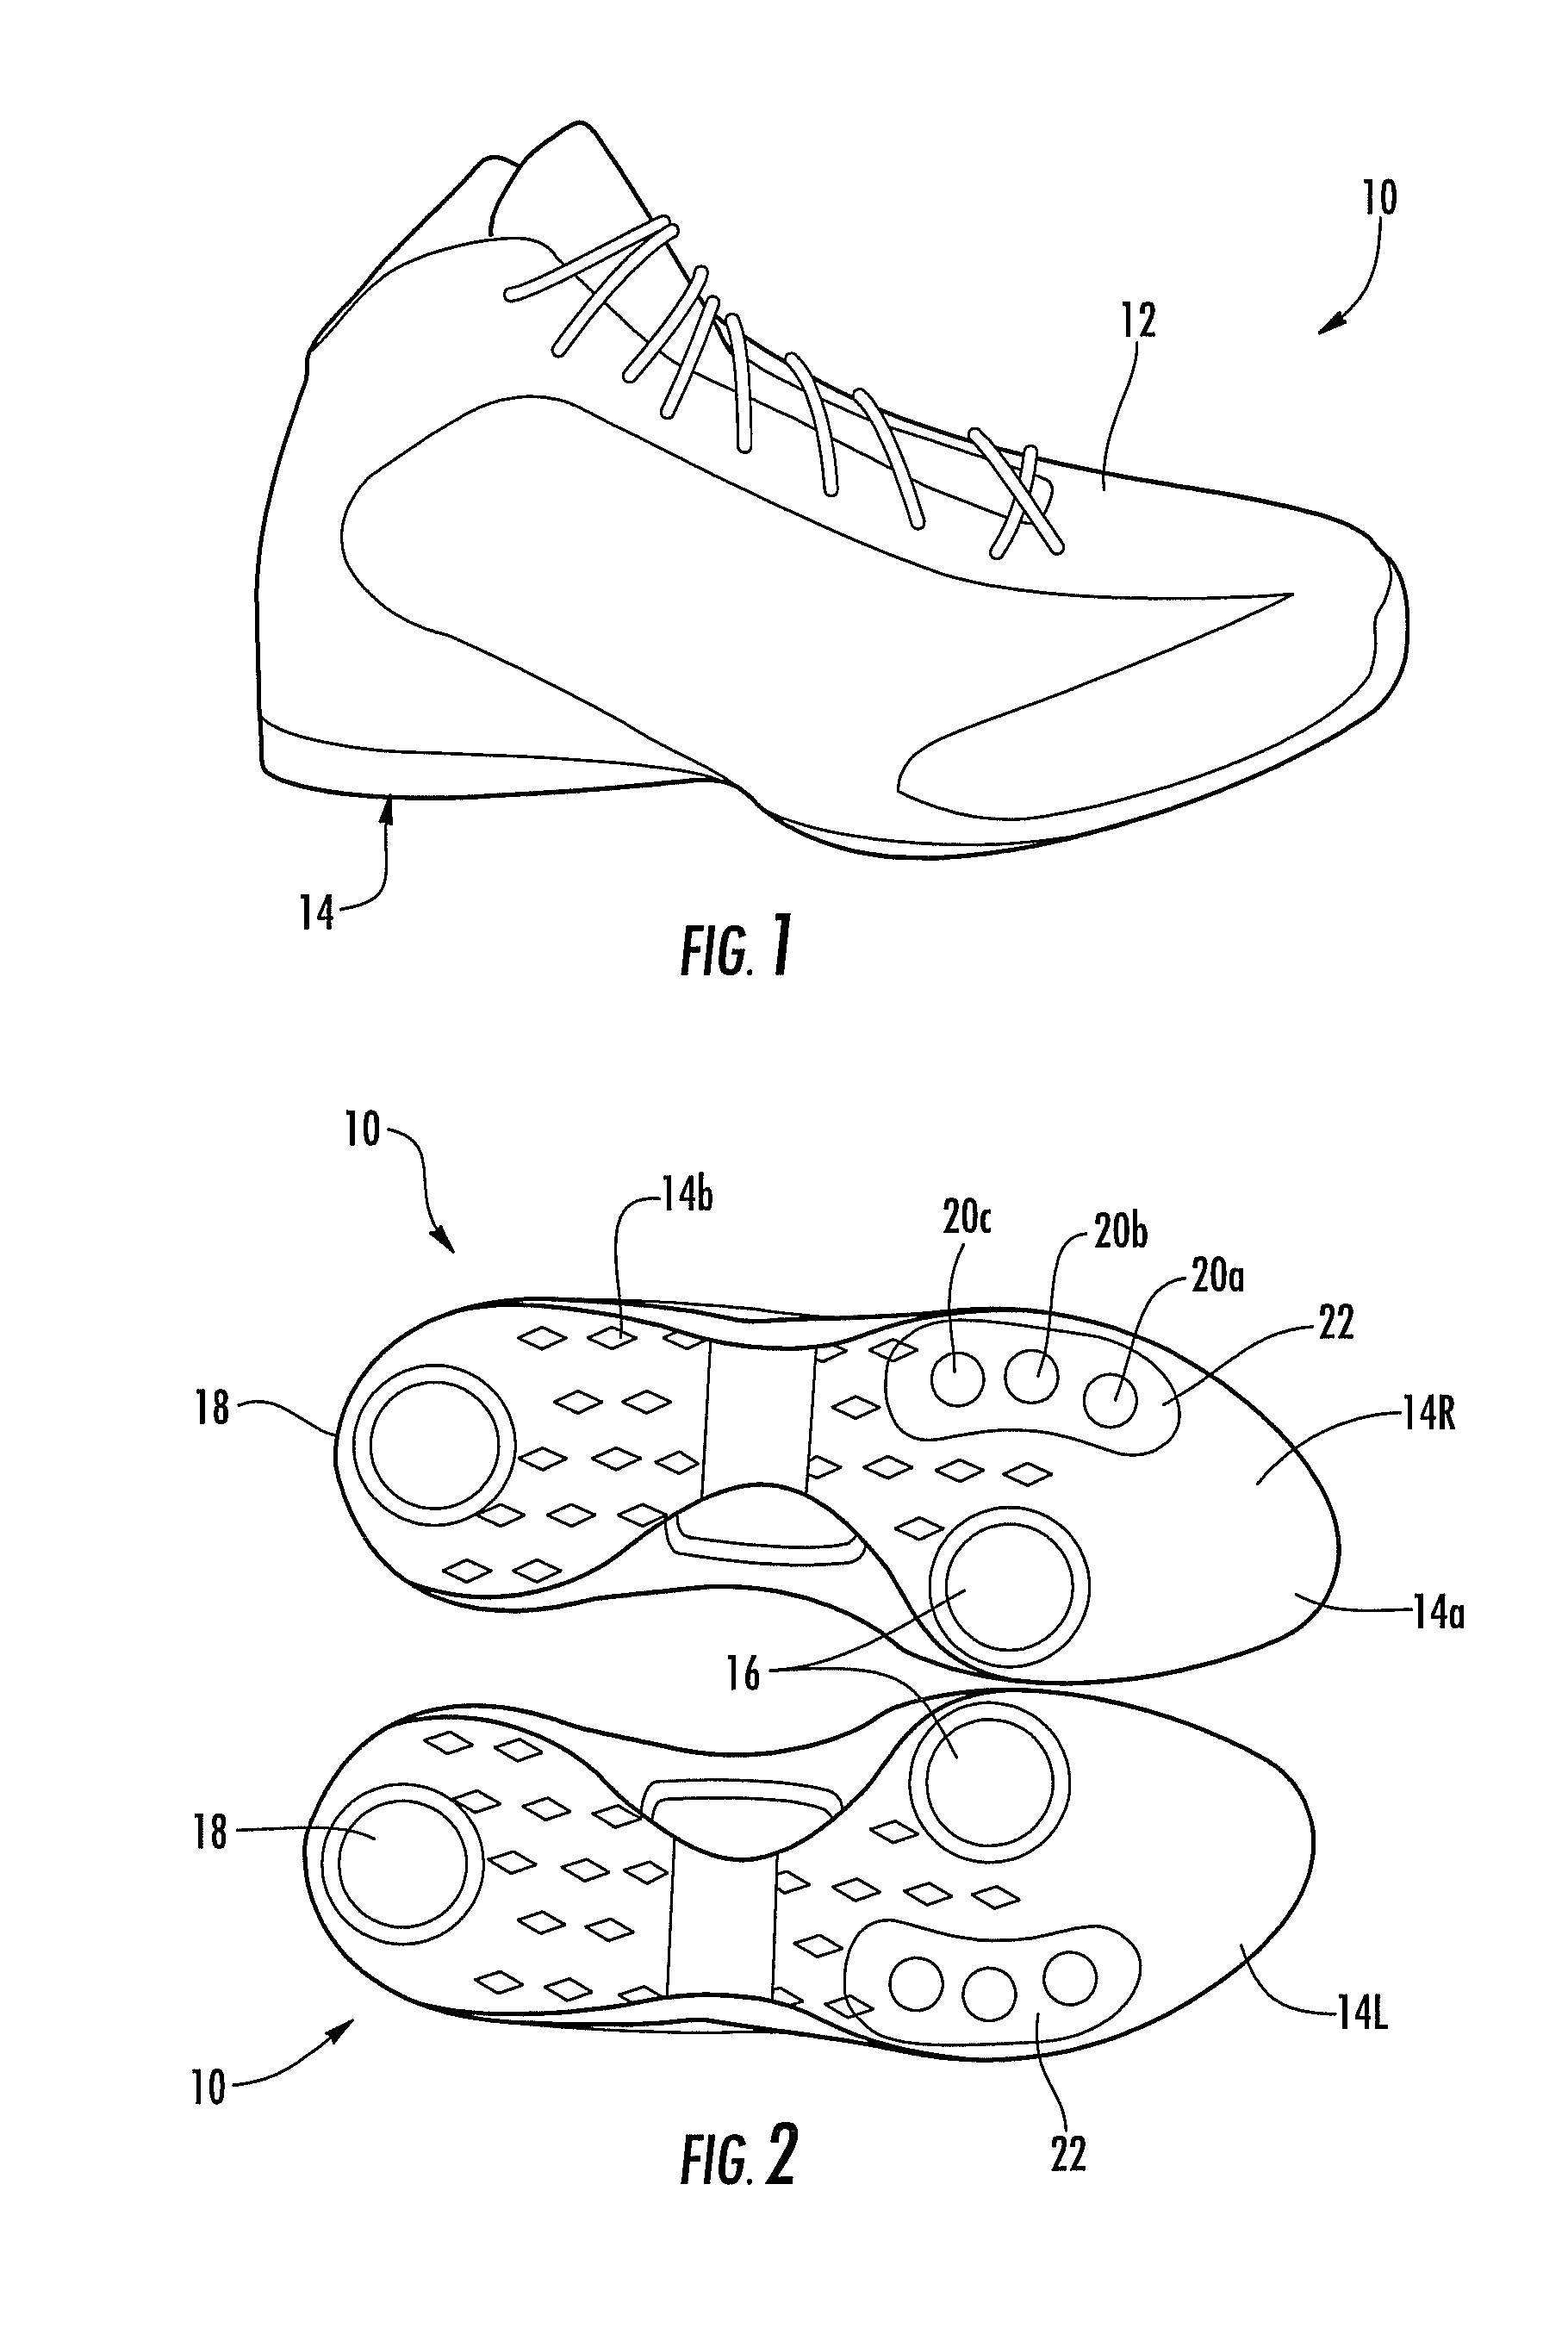 Shoe soles for enhancing gripping with a smooth hard surface